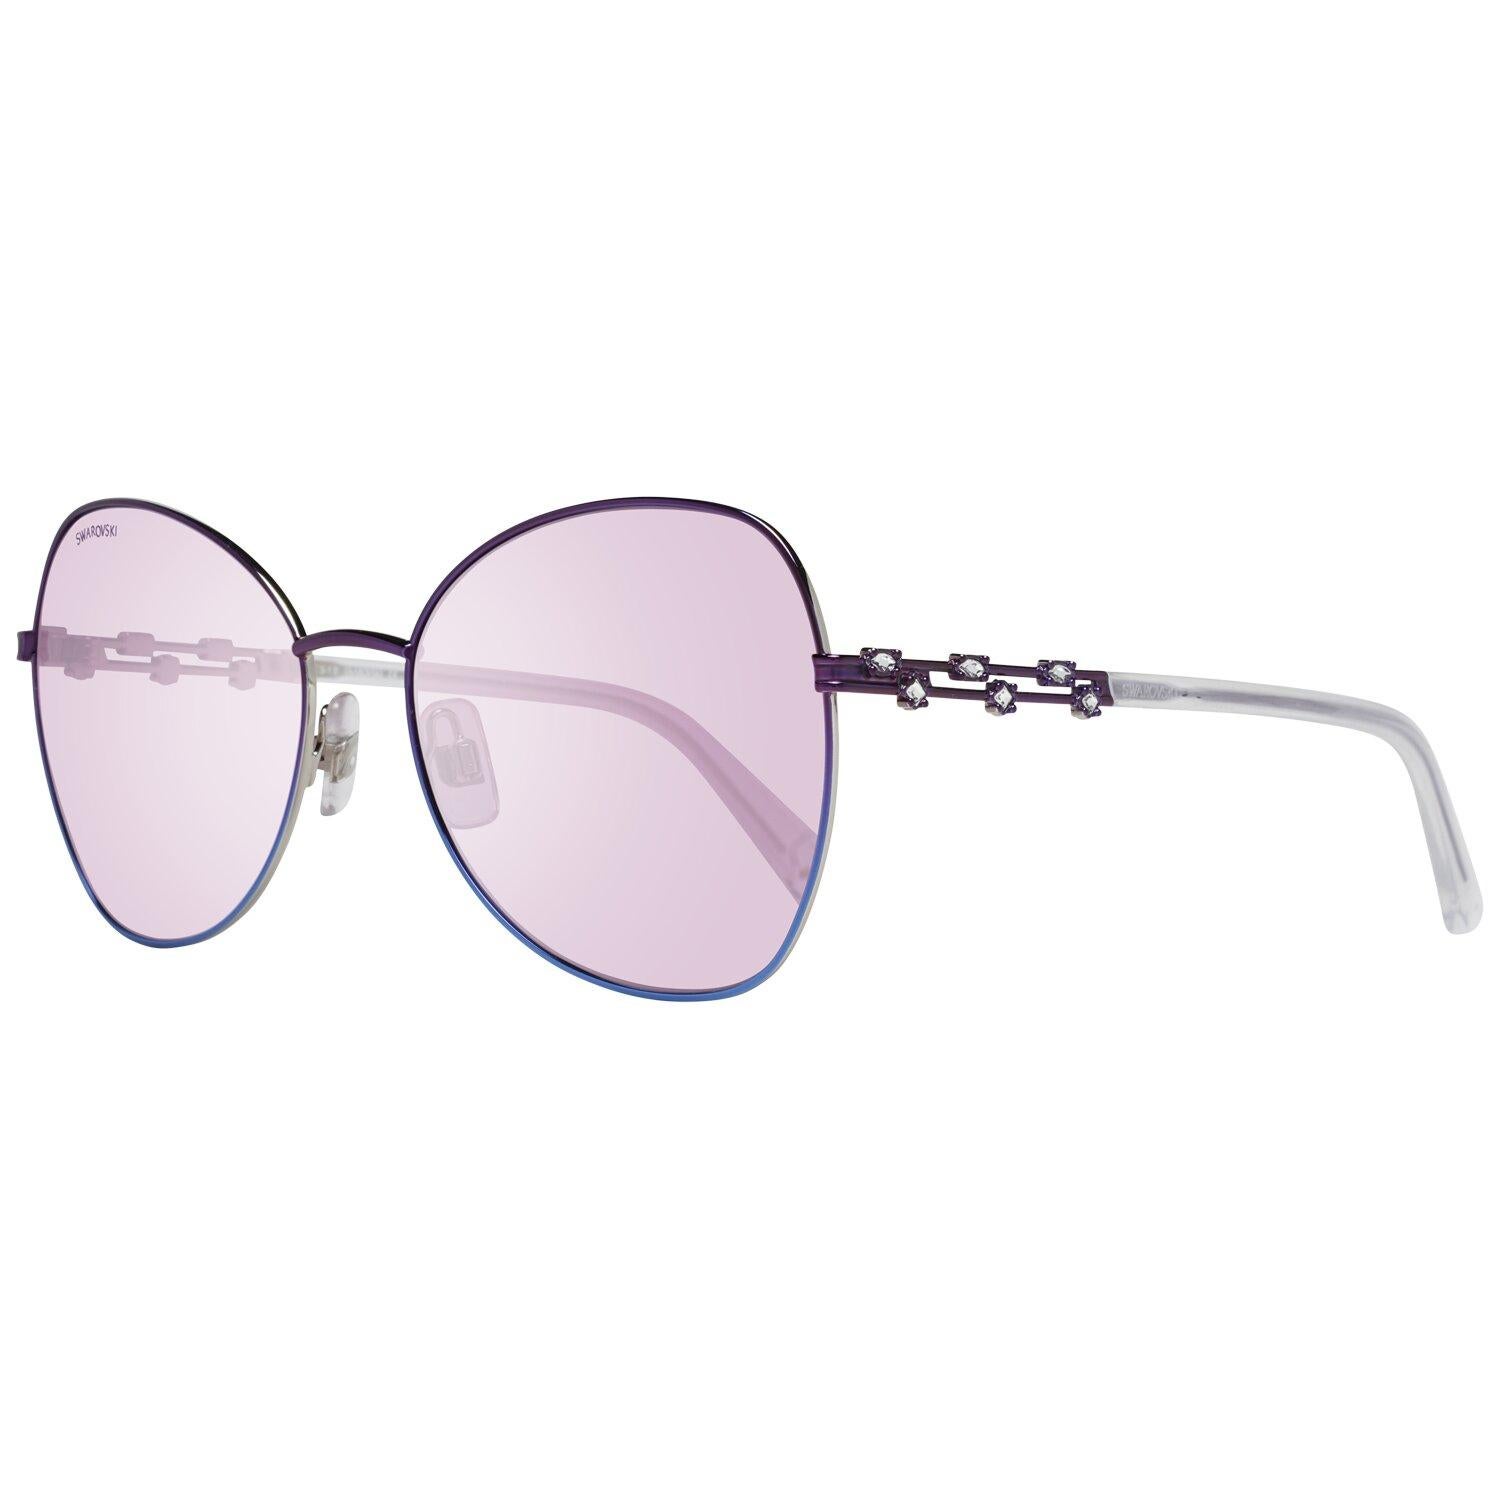 DetailsMATERIAL: MetalCOLOR: PurpleMODEL: SK0290 5783ZGENDER: WomenCOUNTRY OF MANUFACTURE: ChinaTYPE: SunglassesORIGINAL CASE?: YesSTYLE: ButterflyOCCASION: CasualFEATURES: LightweightLENS COLOR: PurpleLENS TECHNOLOGY: GradientYEAR MANUFACTURED: